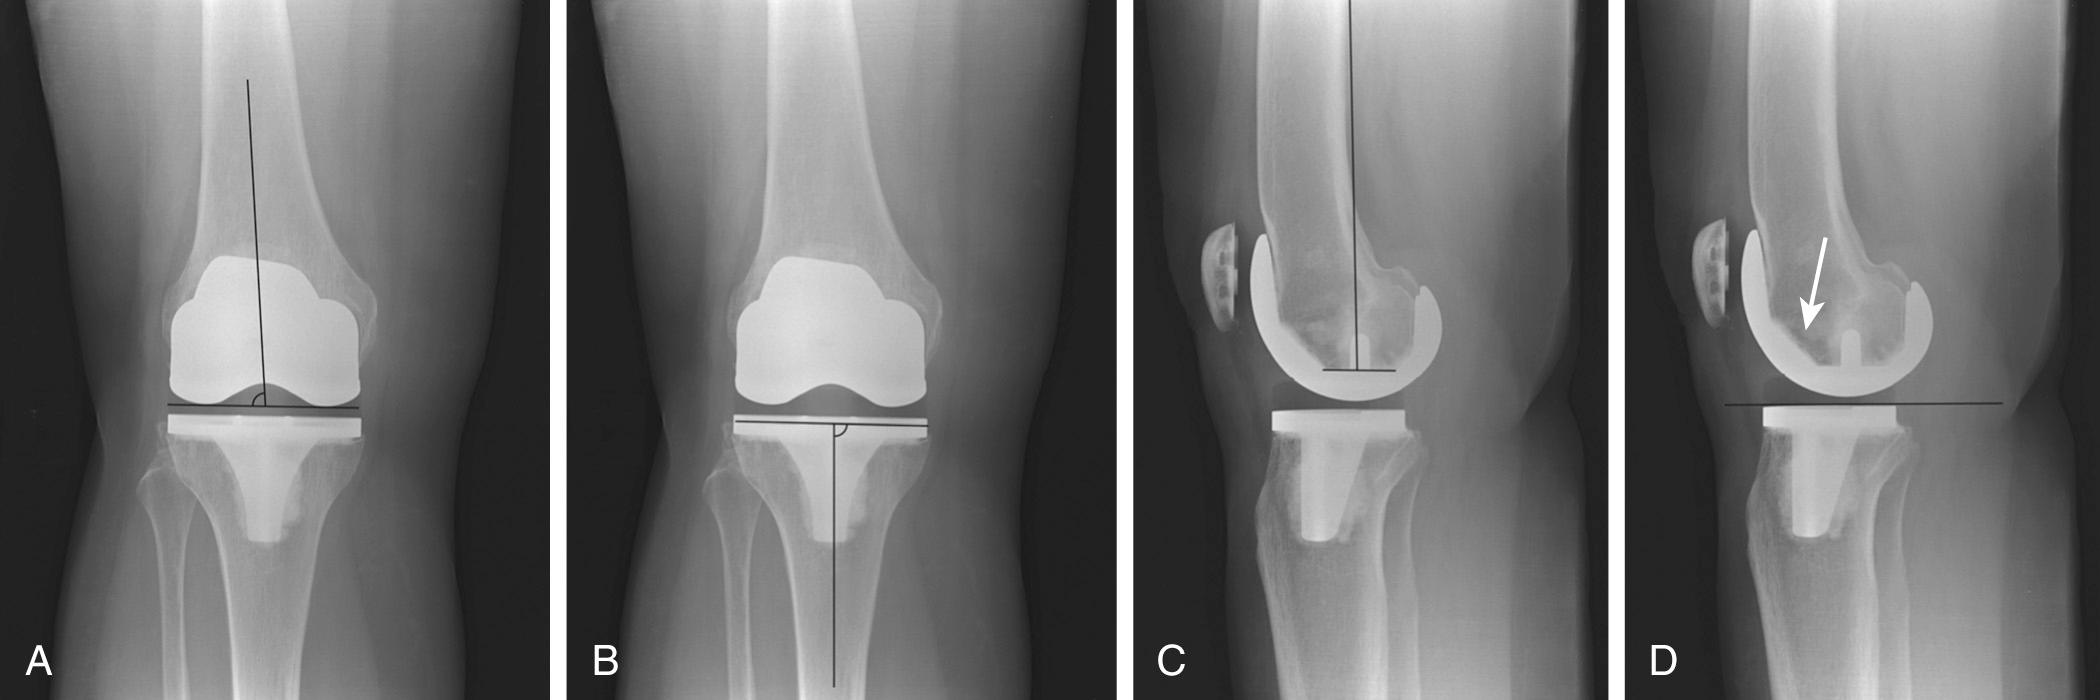 FIG 13.1, Normal Component Positioning on Standing Knee Radiographs